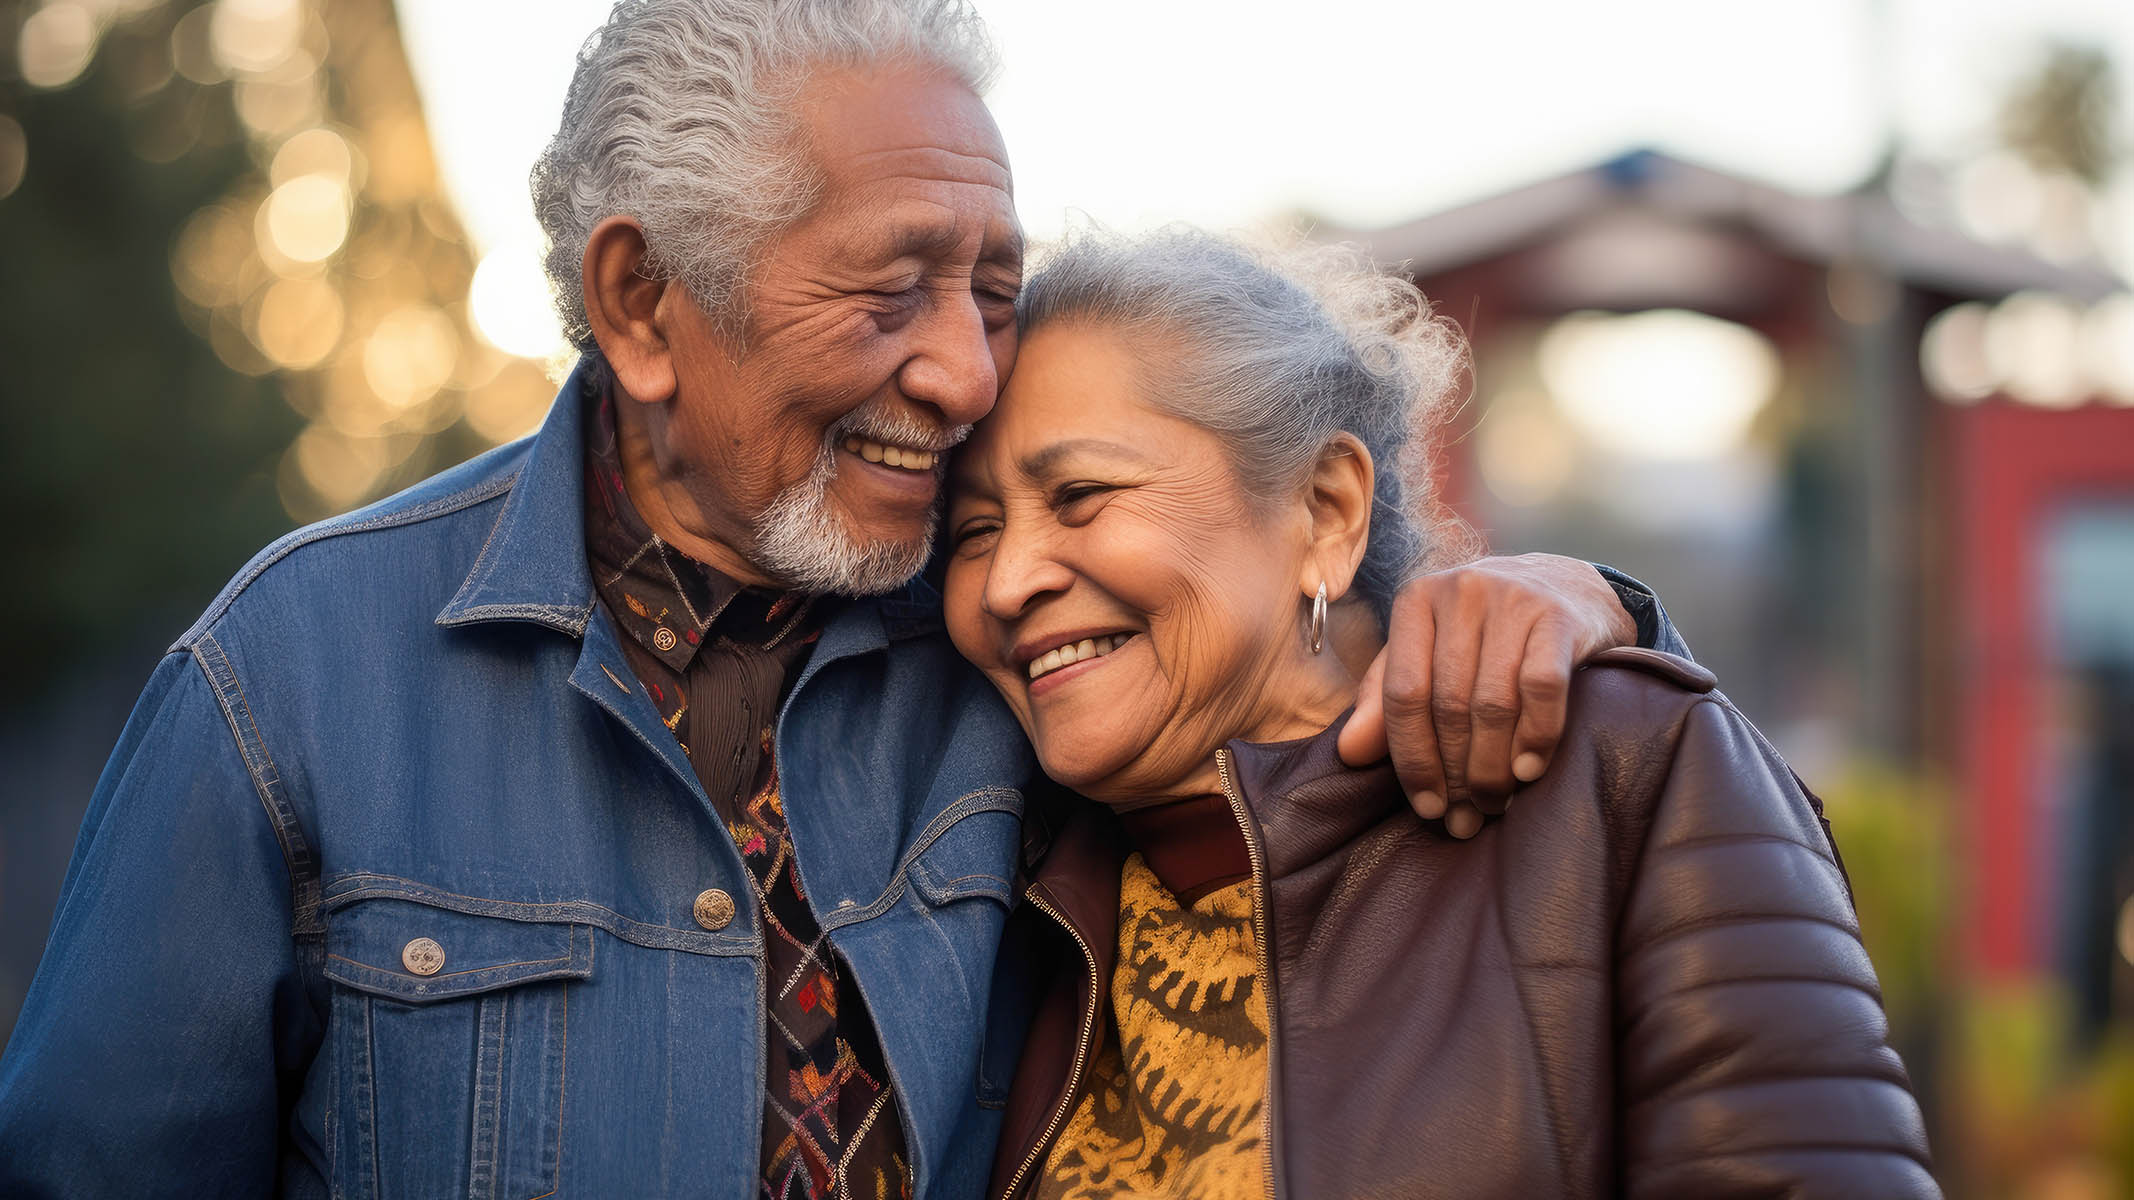 An older couple hugging and smiling outdoors